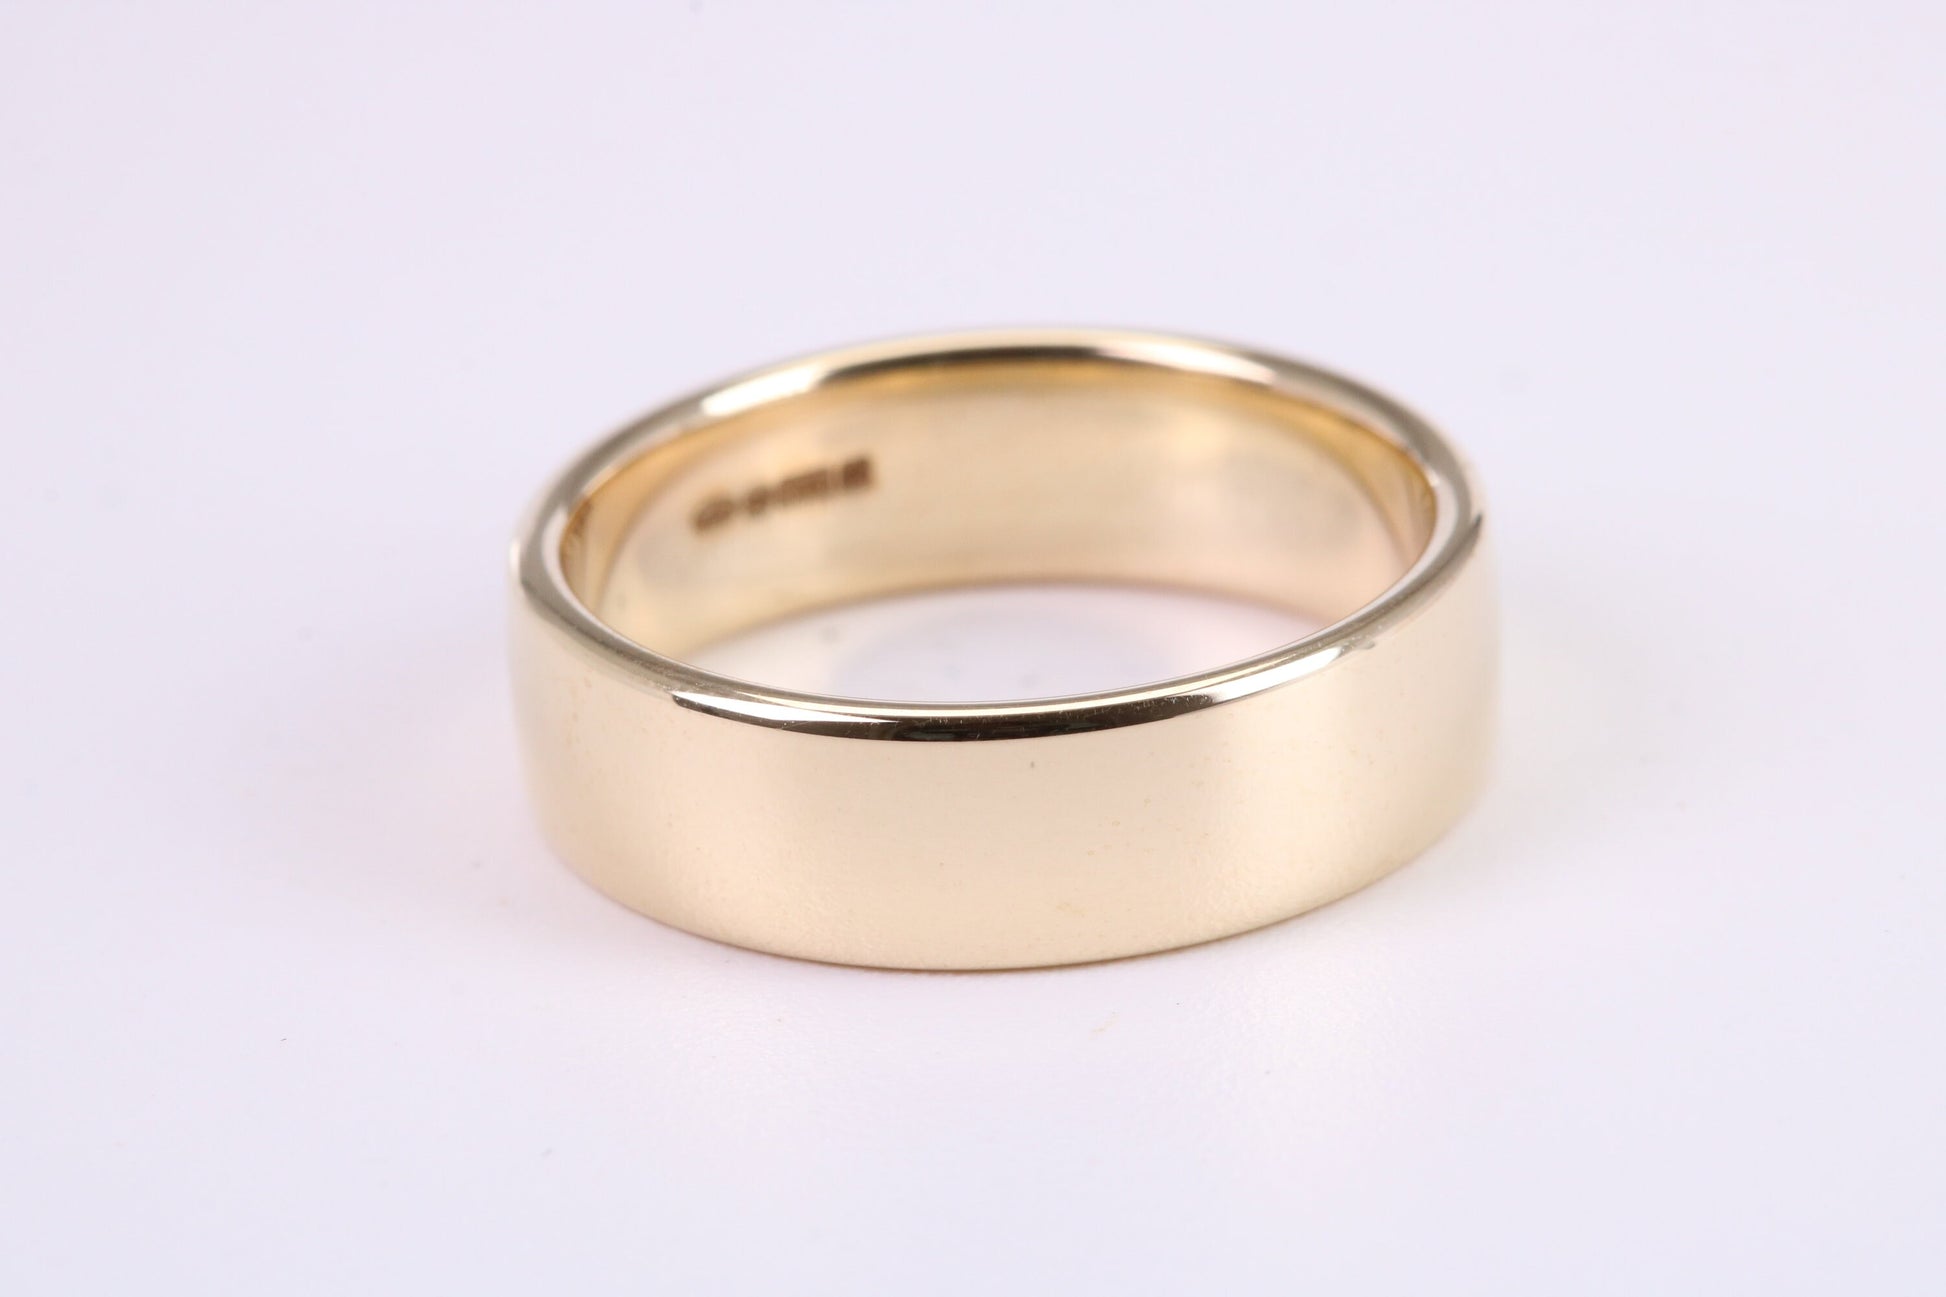 6 mm Wide Simple Comfort Court Profile Wedding Band, Made from Solid Yellow Gold, British Hallmarked